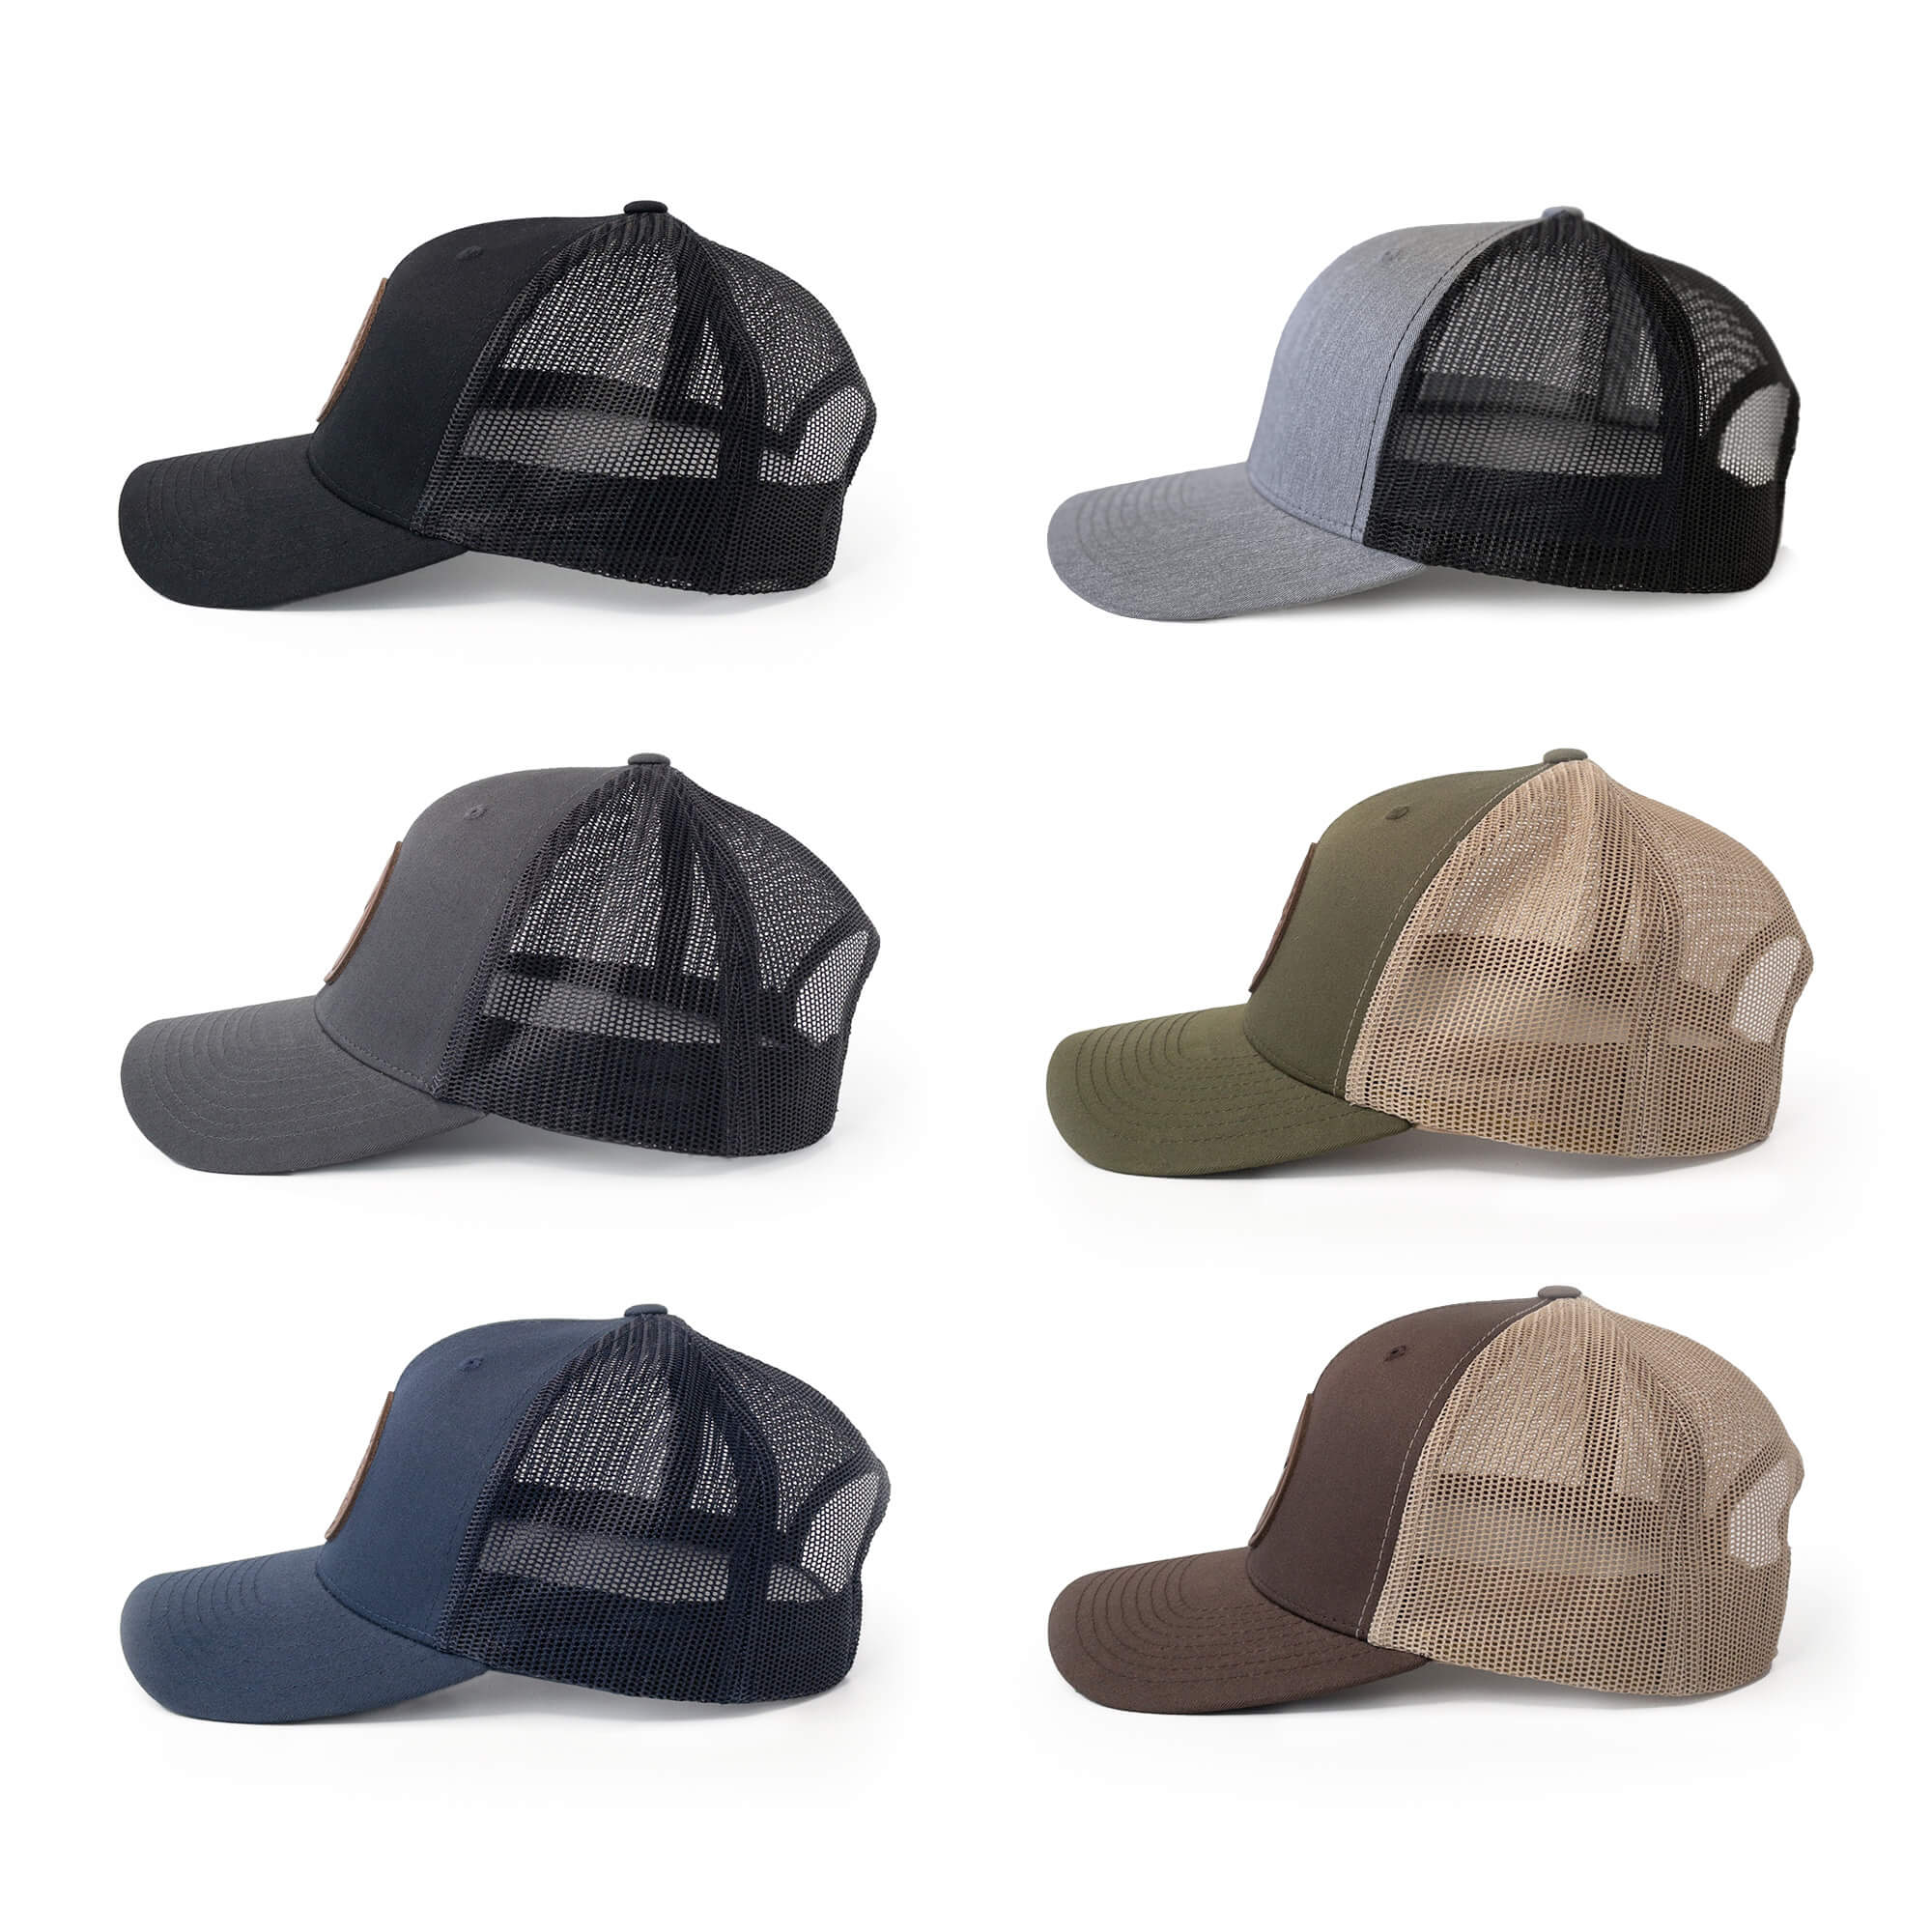 Leather patch trucker hats available in 6 colors | BLACK-007-001, CHARC-007-001, NAVY-007-001, HGREY-007-001, MOSS-007-001, BROWN-007-001